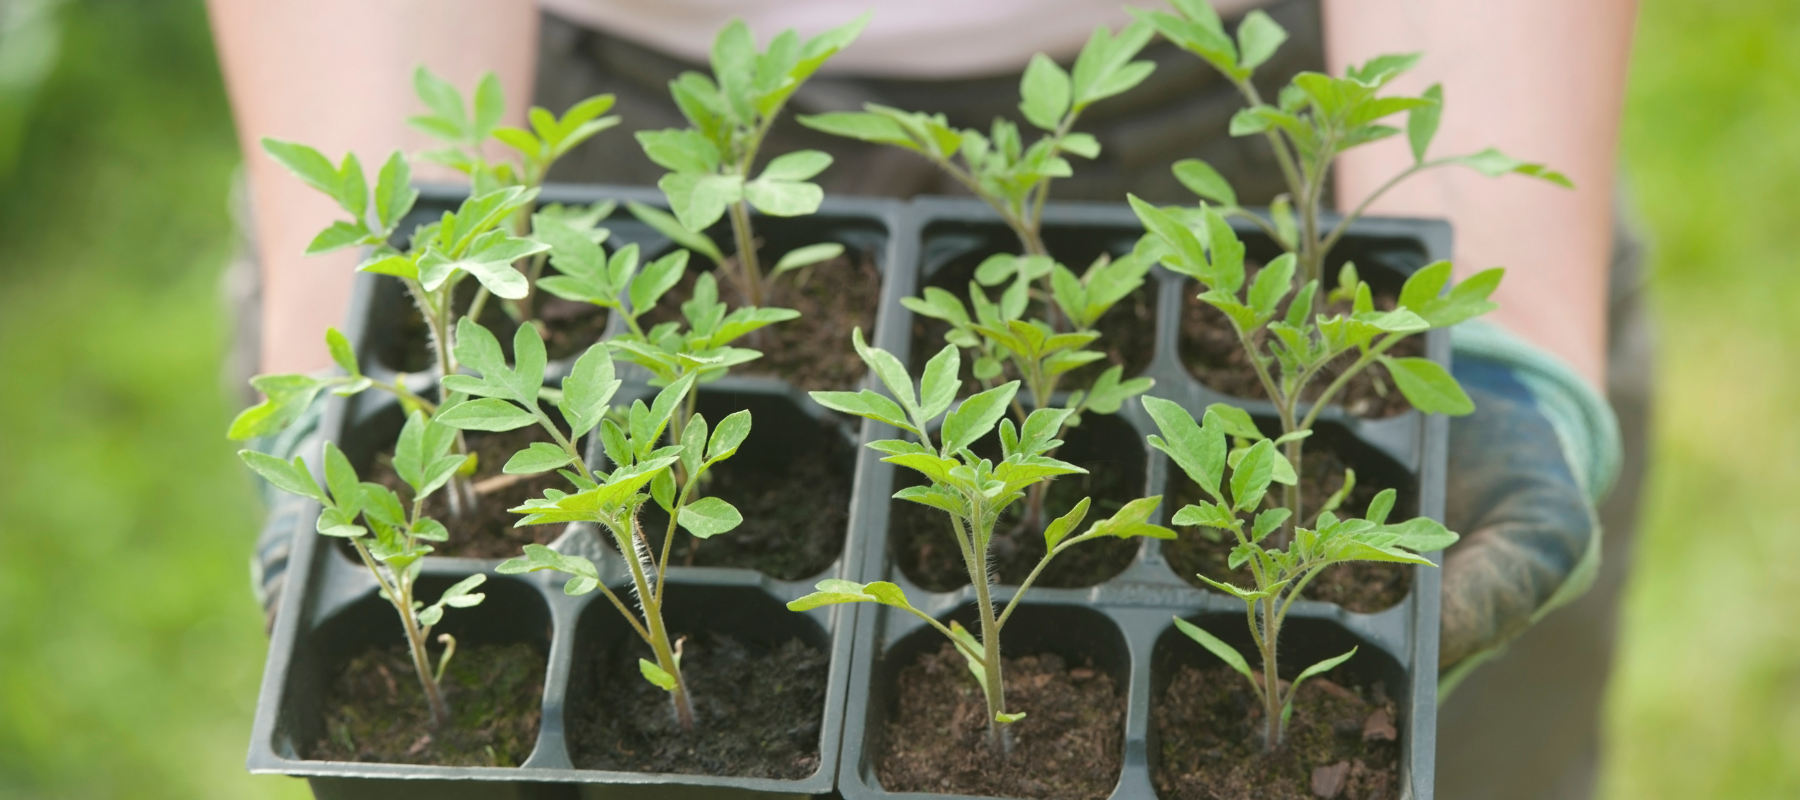 How to plant our your tomato seedlings